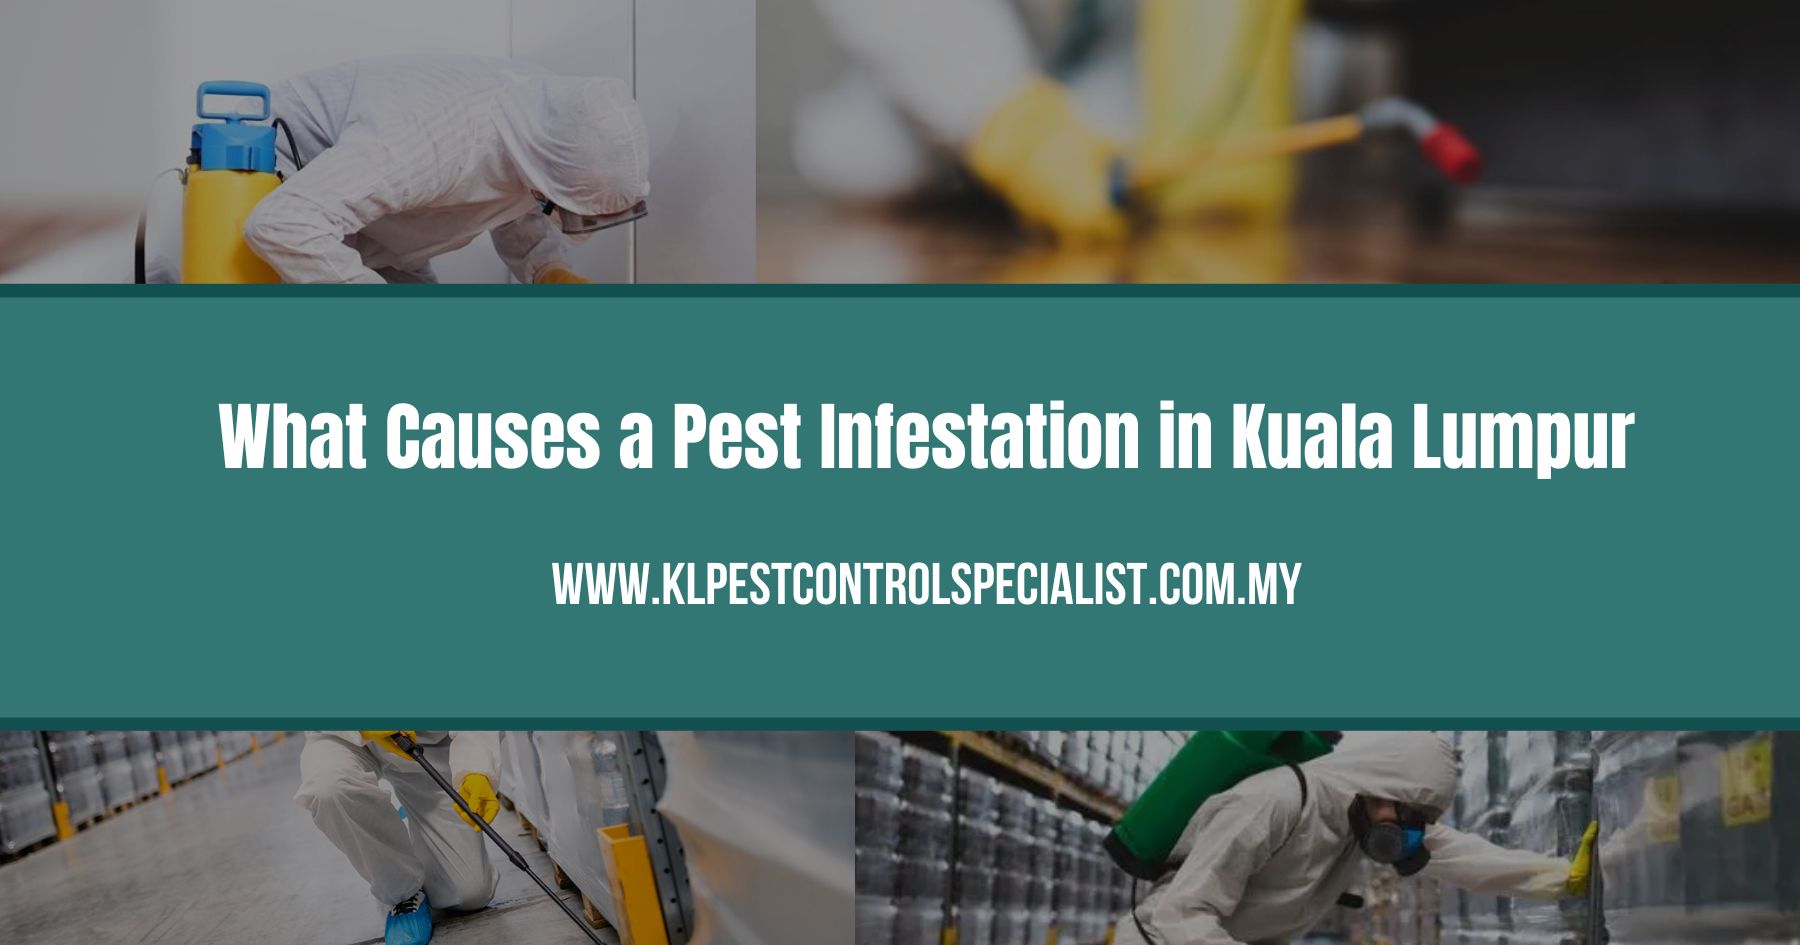 What Causes a Pest Infestation in Kuala Lumpur